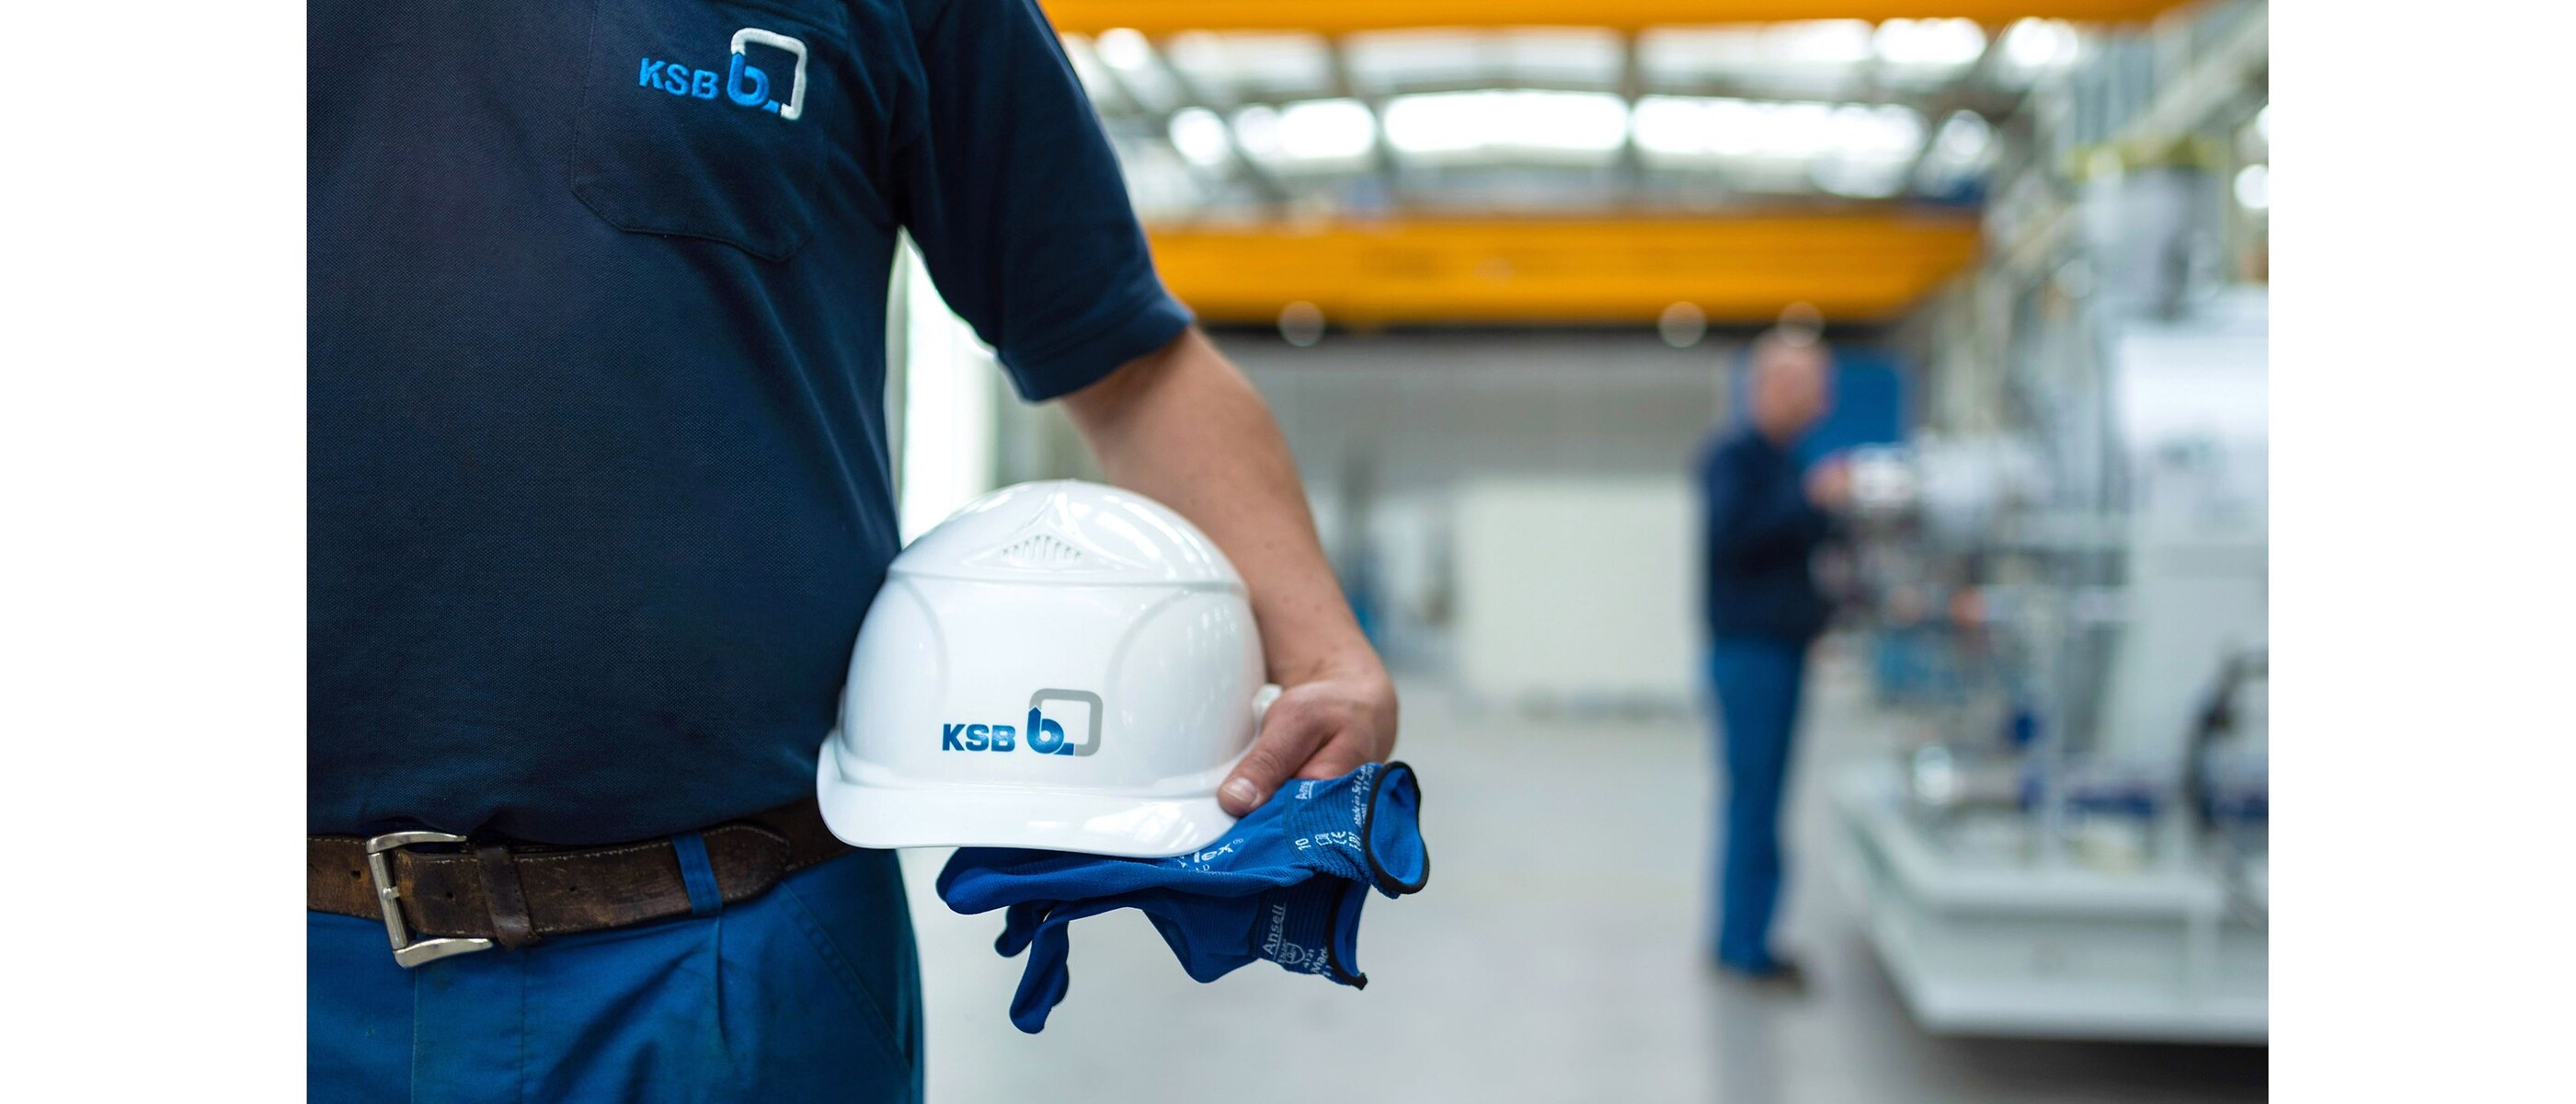 KSB employee holding a hard hat and gloves